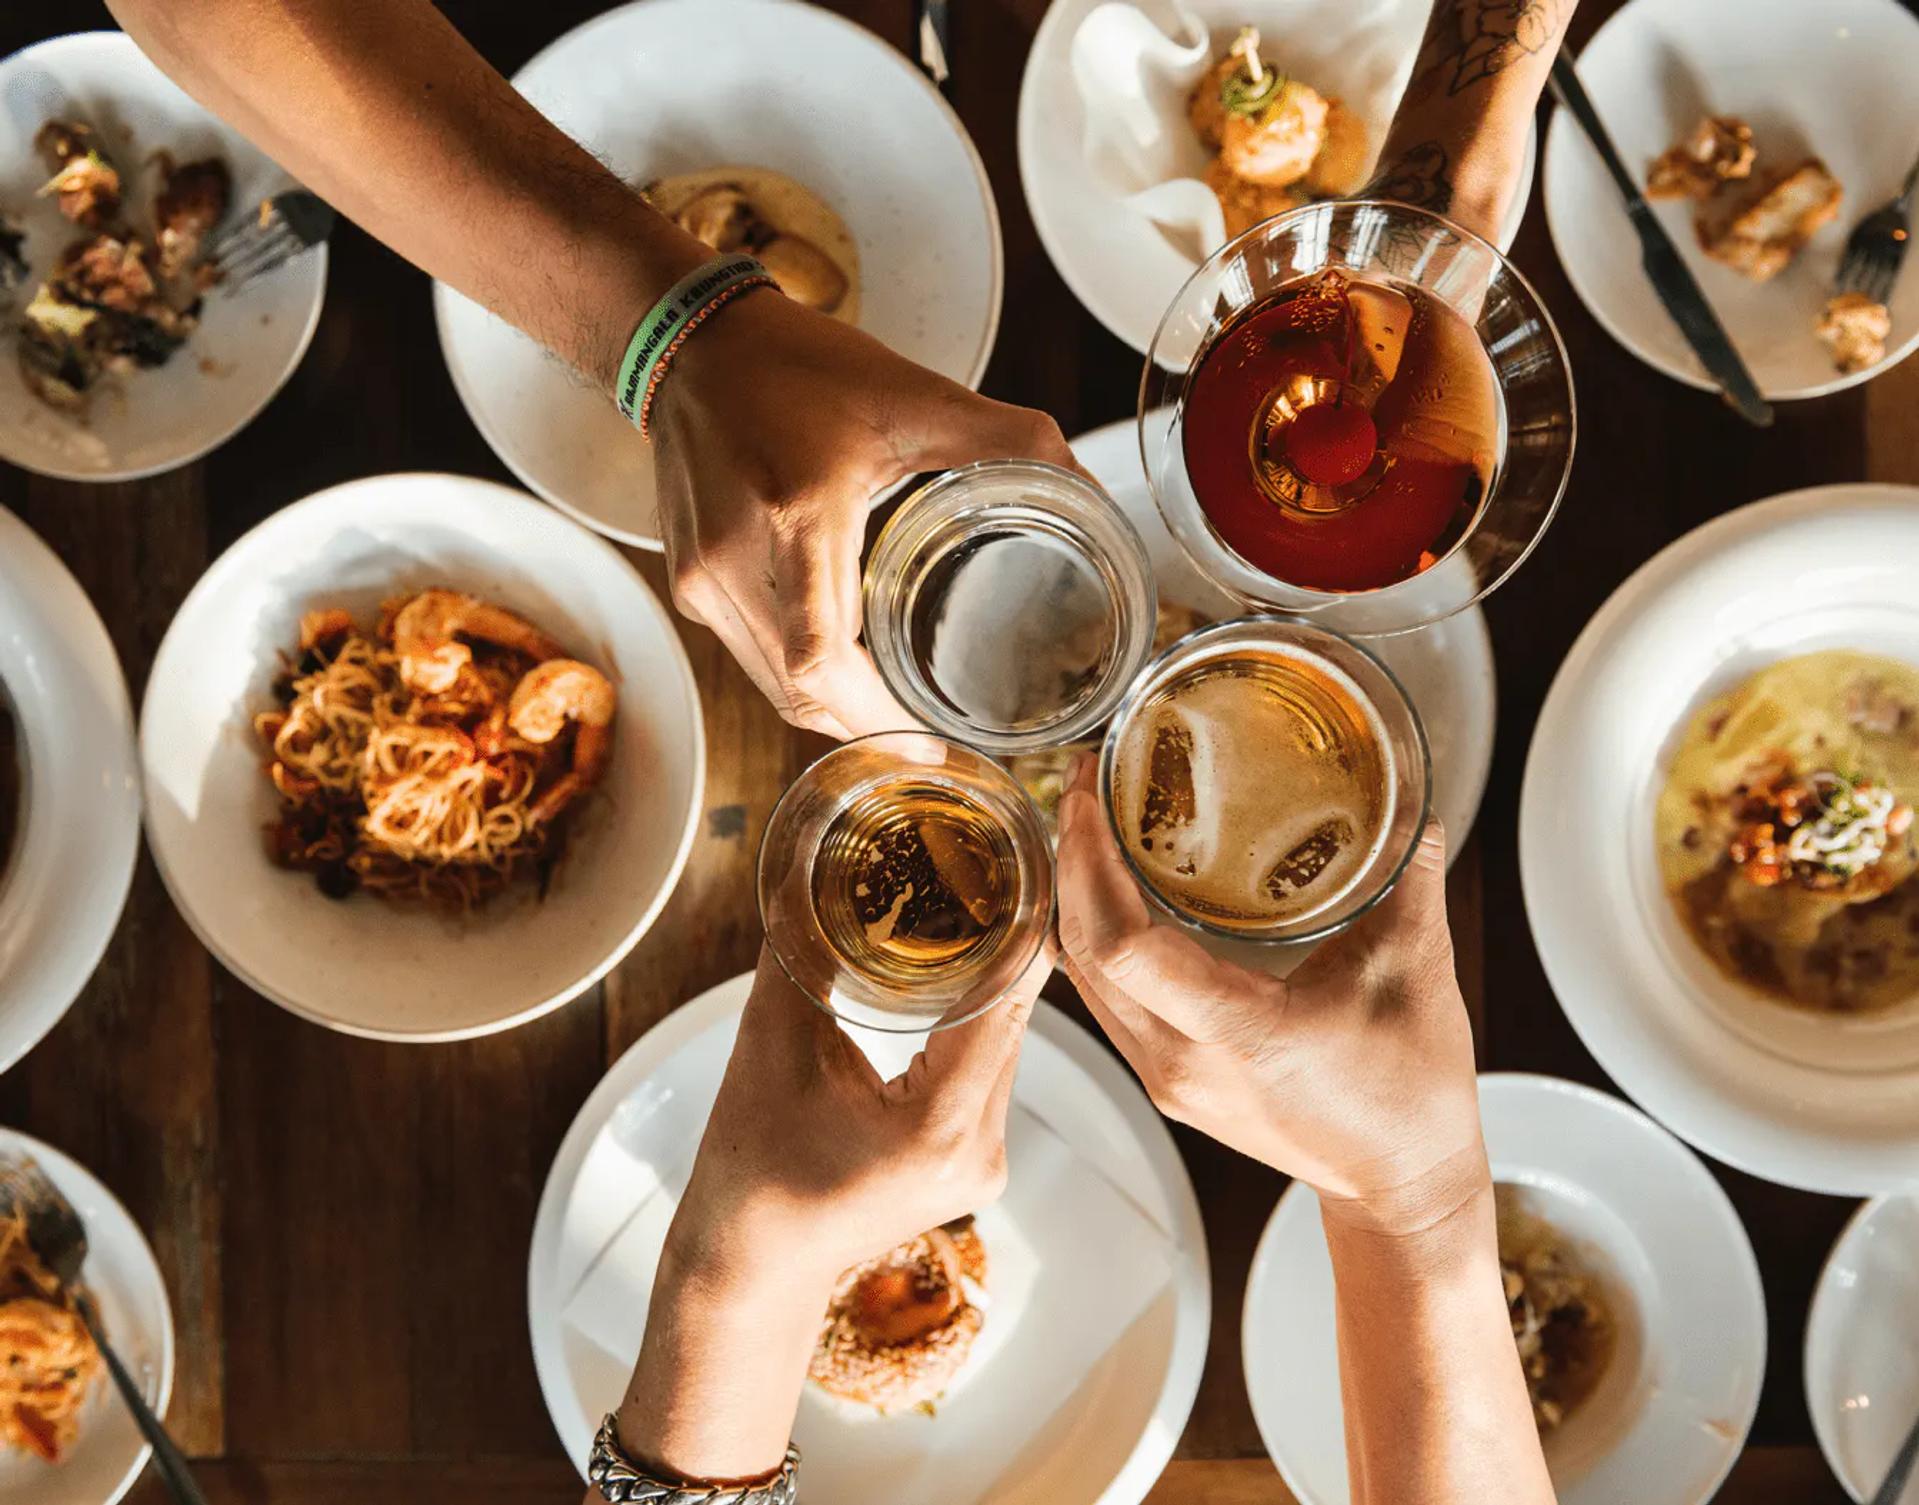 A table with multiple plates of food and hands cheersing with glasses of wine